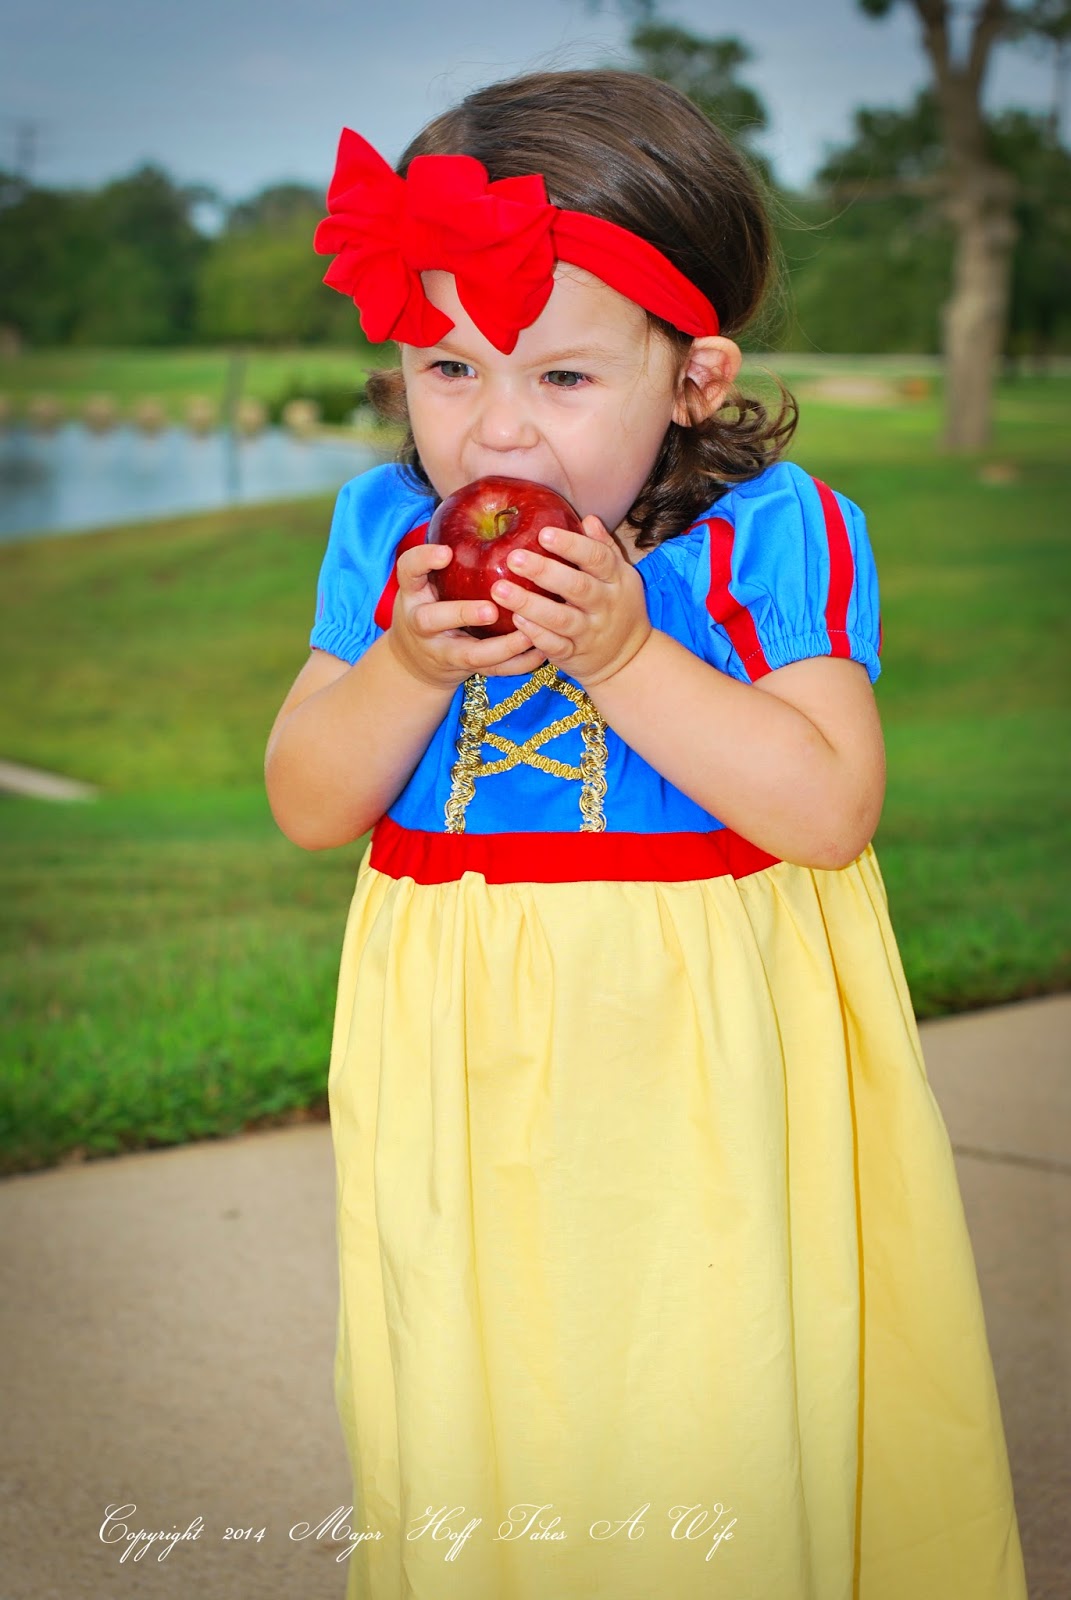 Easy To Sew Snow White Peasant Dress For Halloween or Dress Up - Major ...